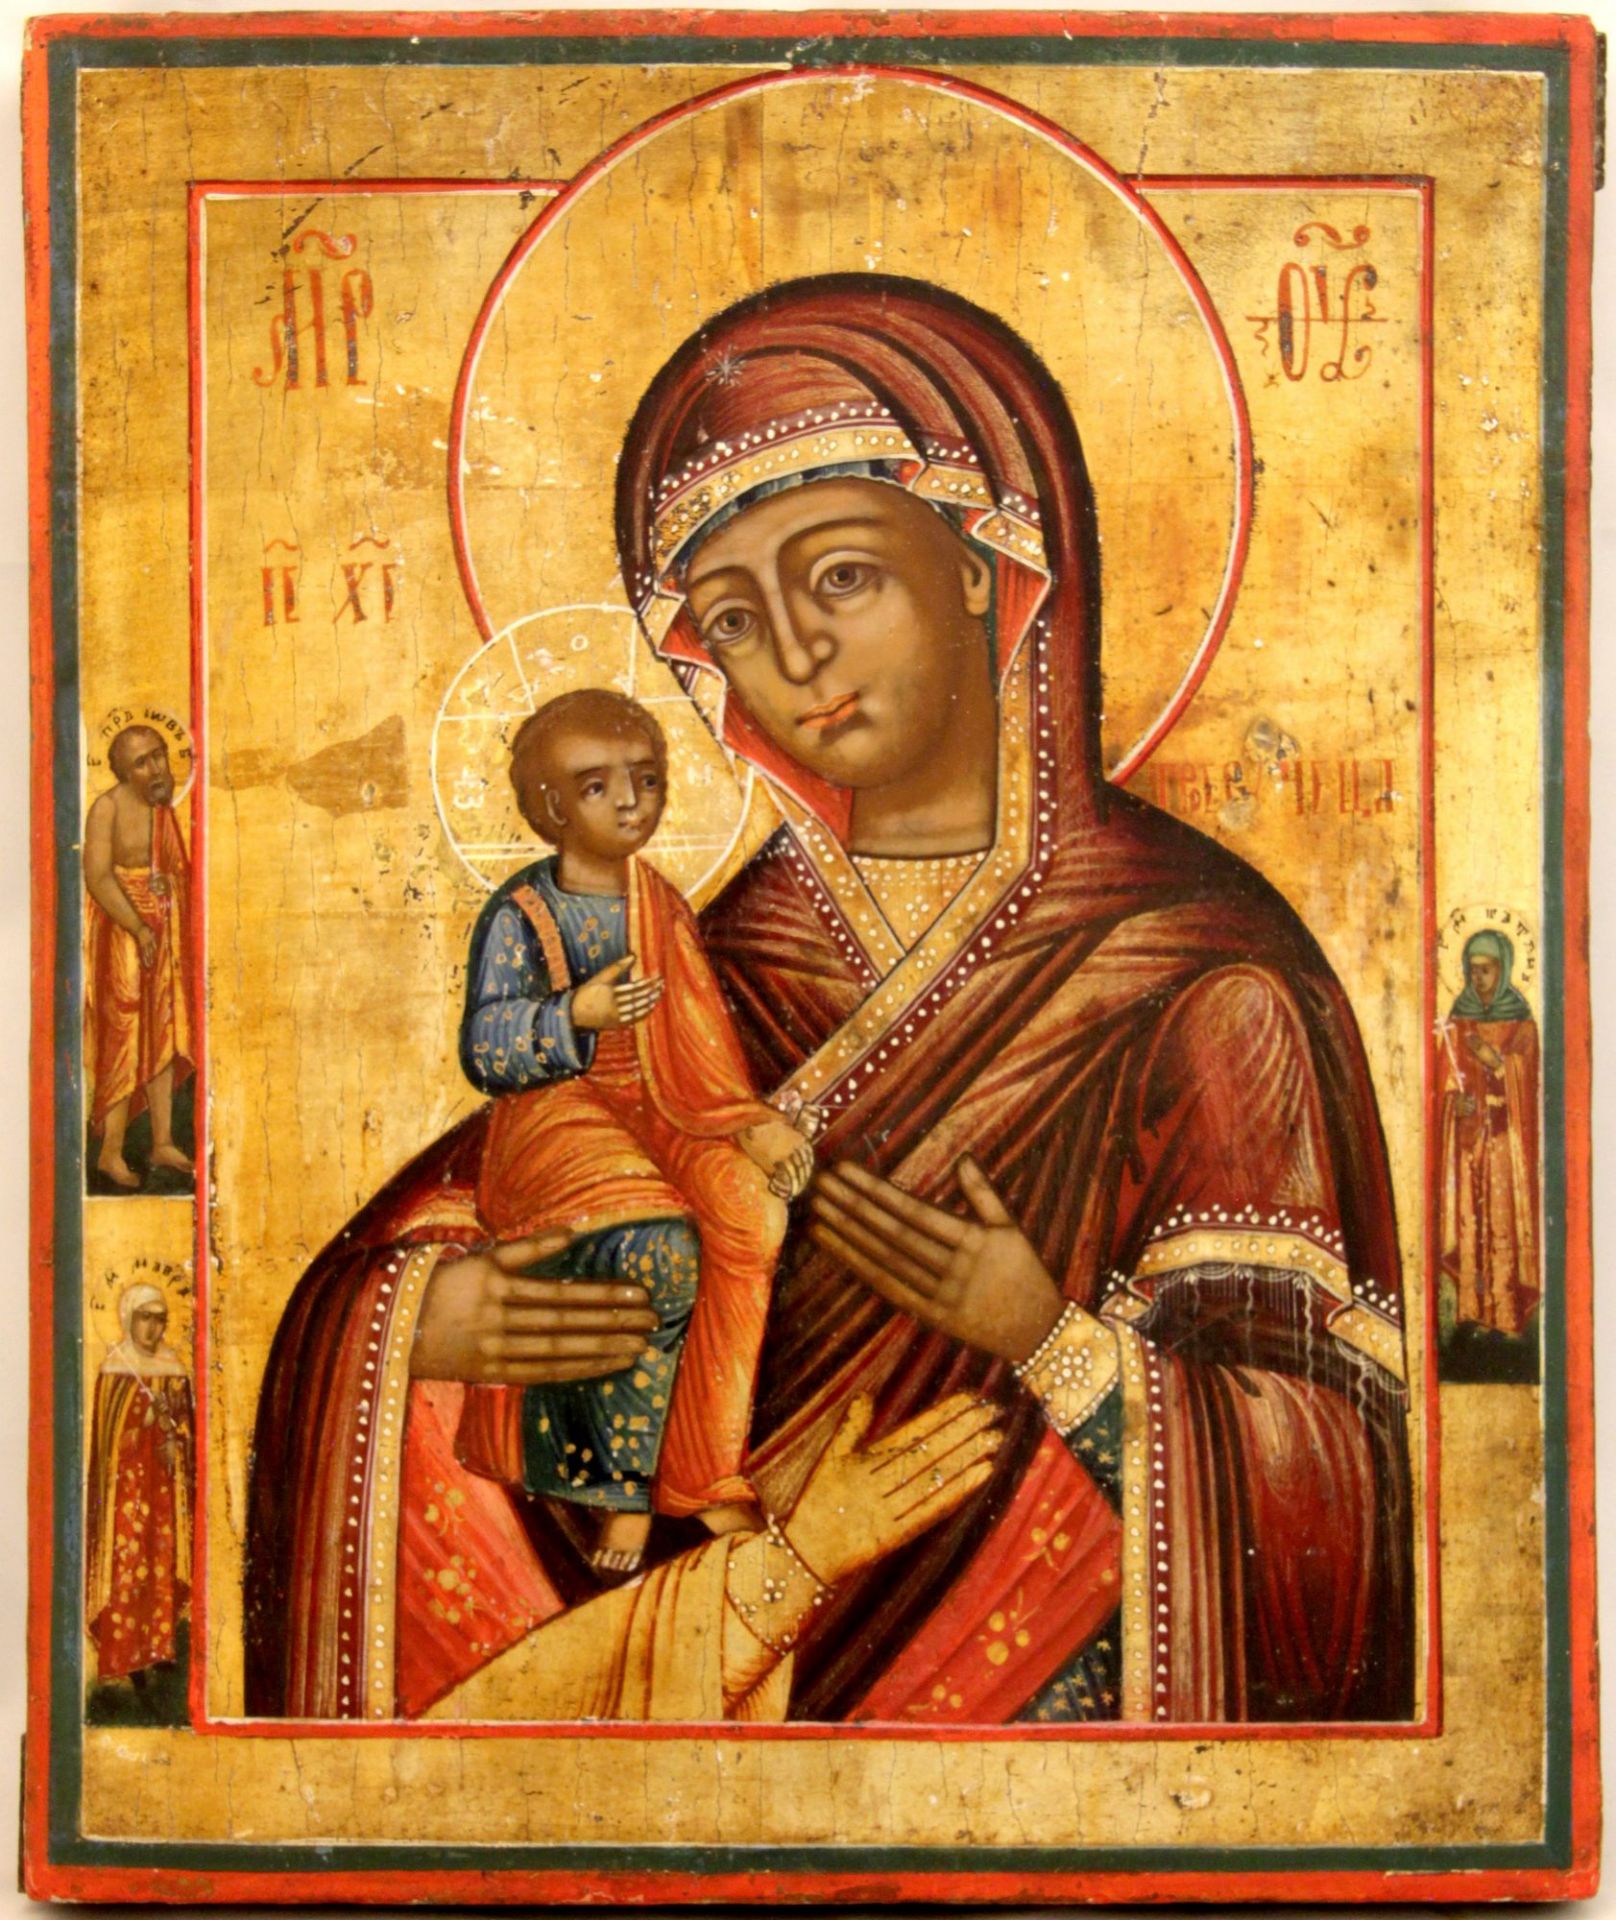 Russian icon "The Three-handed Mother of God". - 19th century, 31x26 cm.